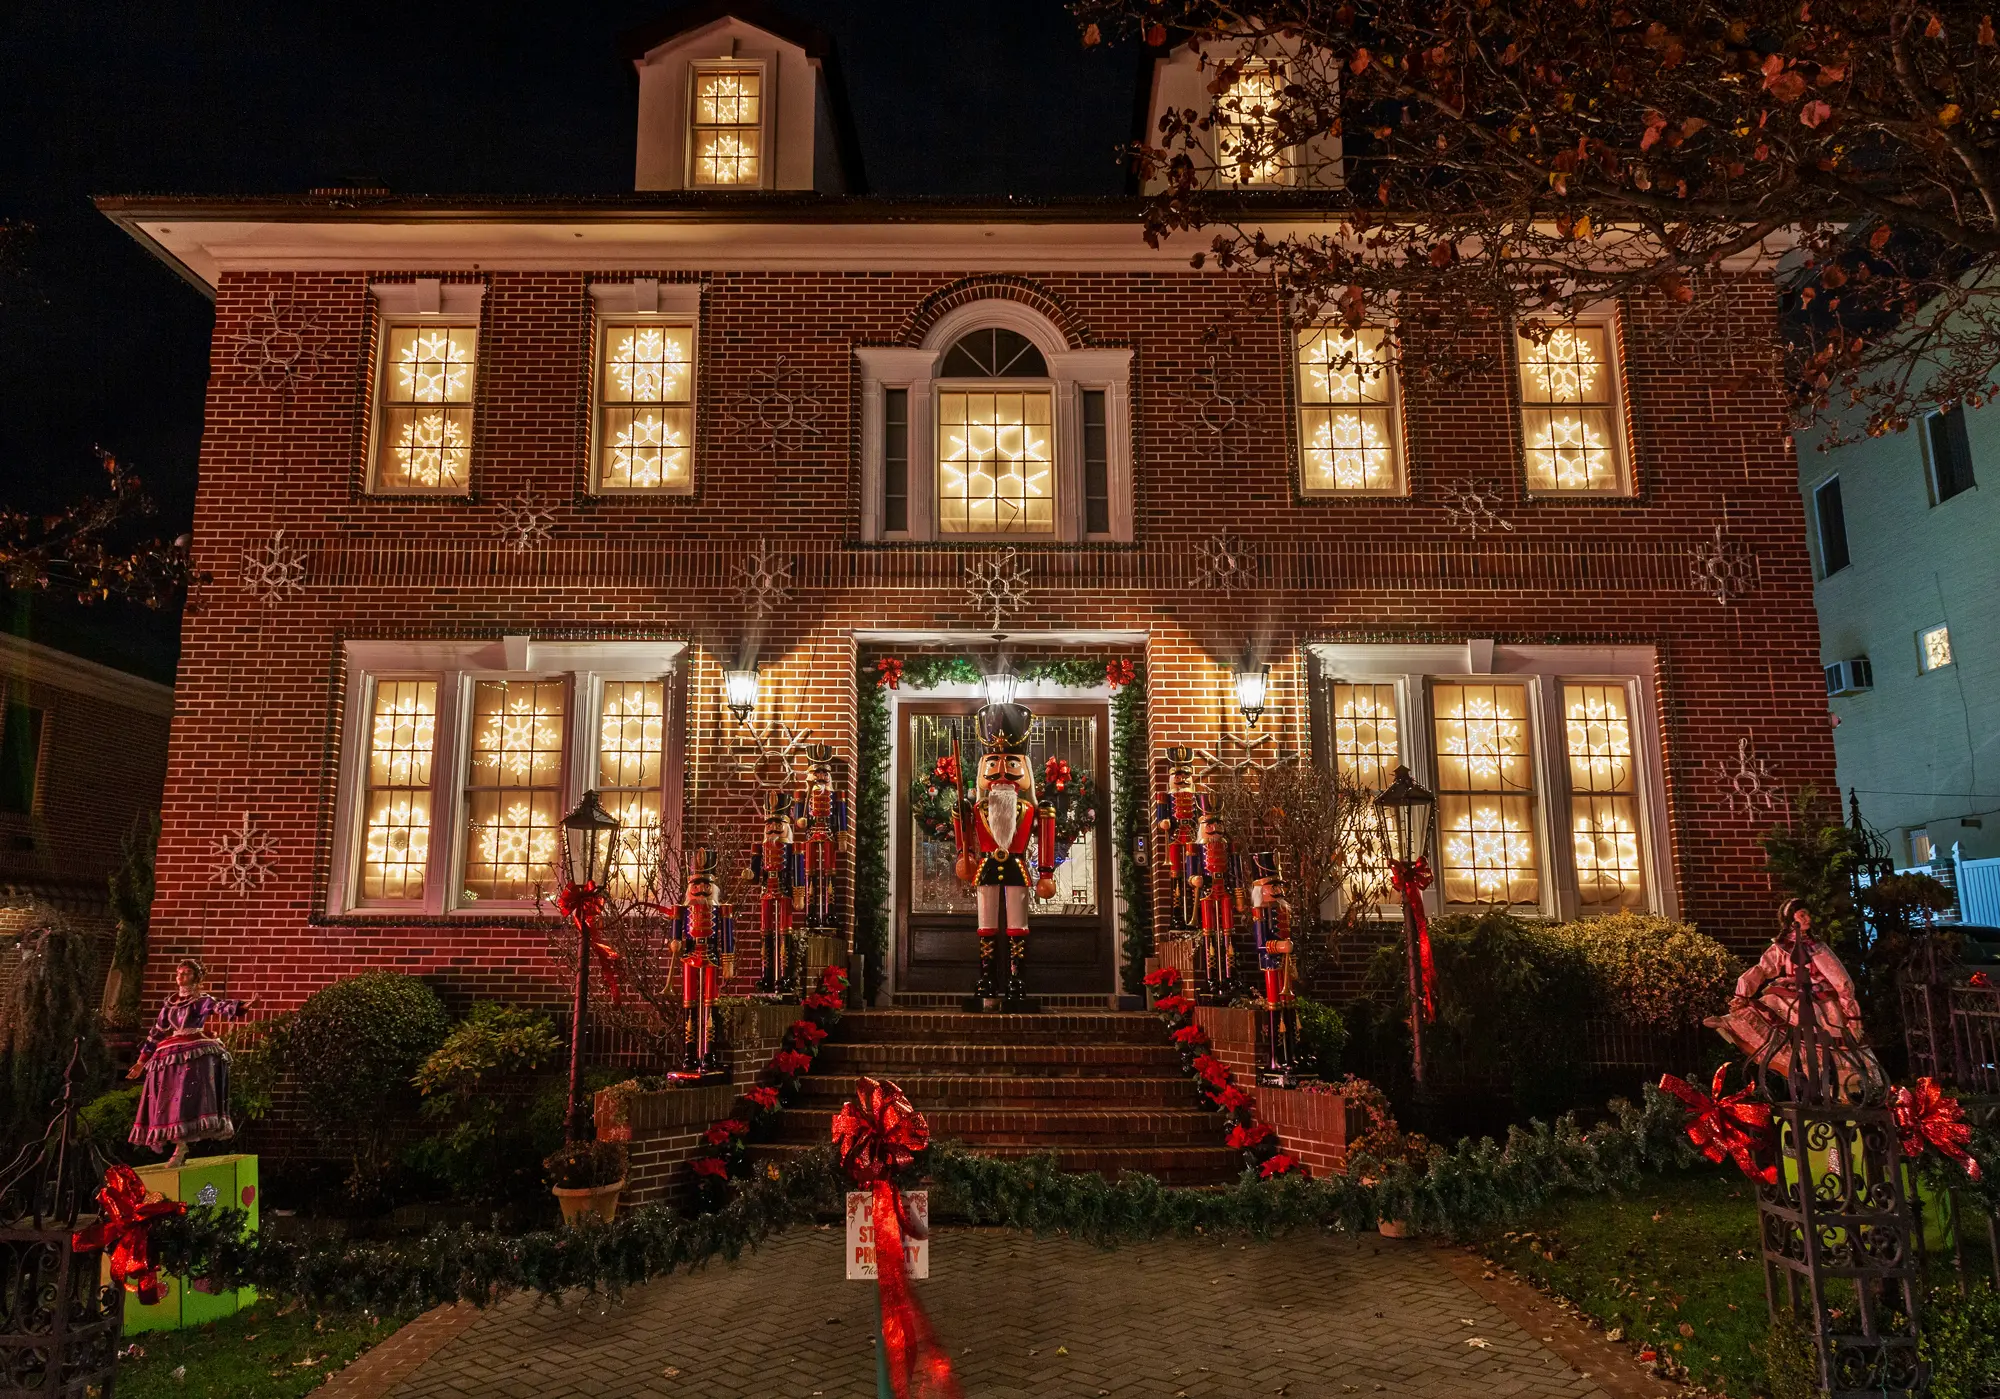 See this year's completely outrageous Dyker Heights Christmas lights ...